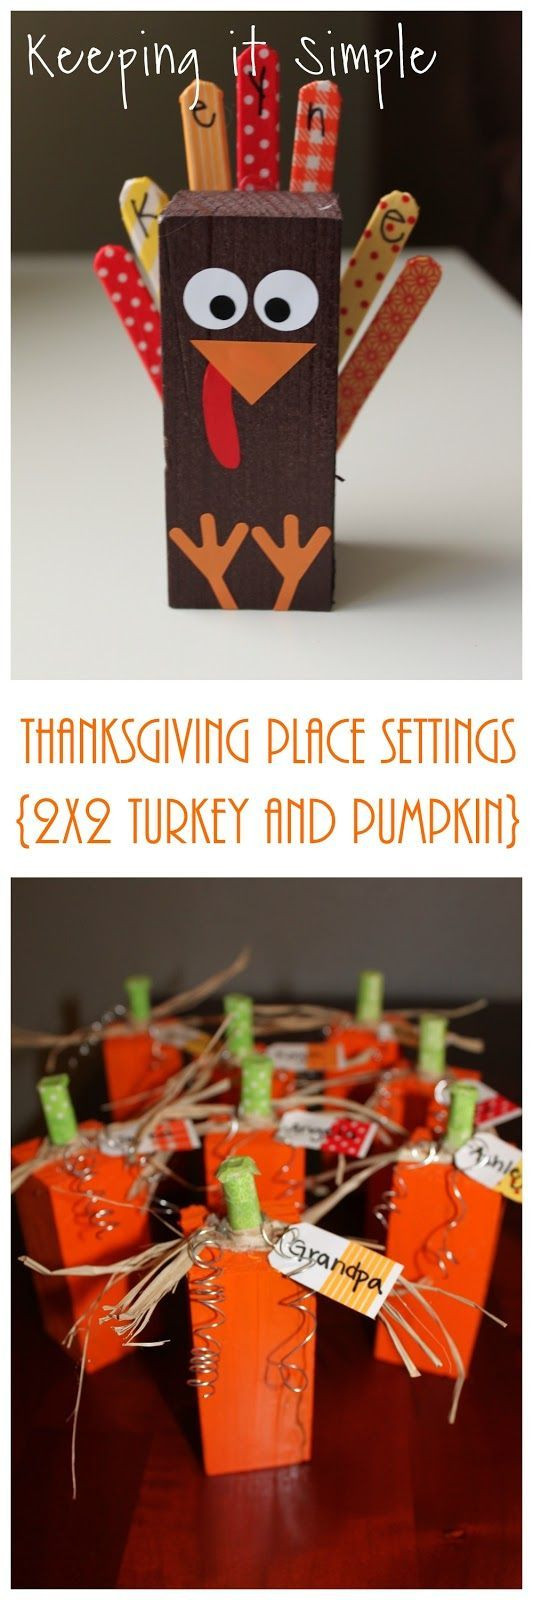 Thanksgiving Wood Crafts
 Thanksgiving Place Settings 2x2 Wood Turkey and Pumpkin